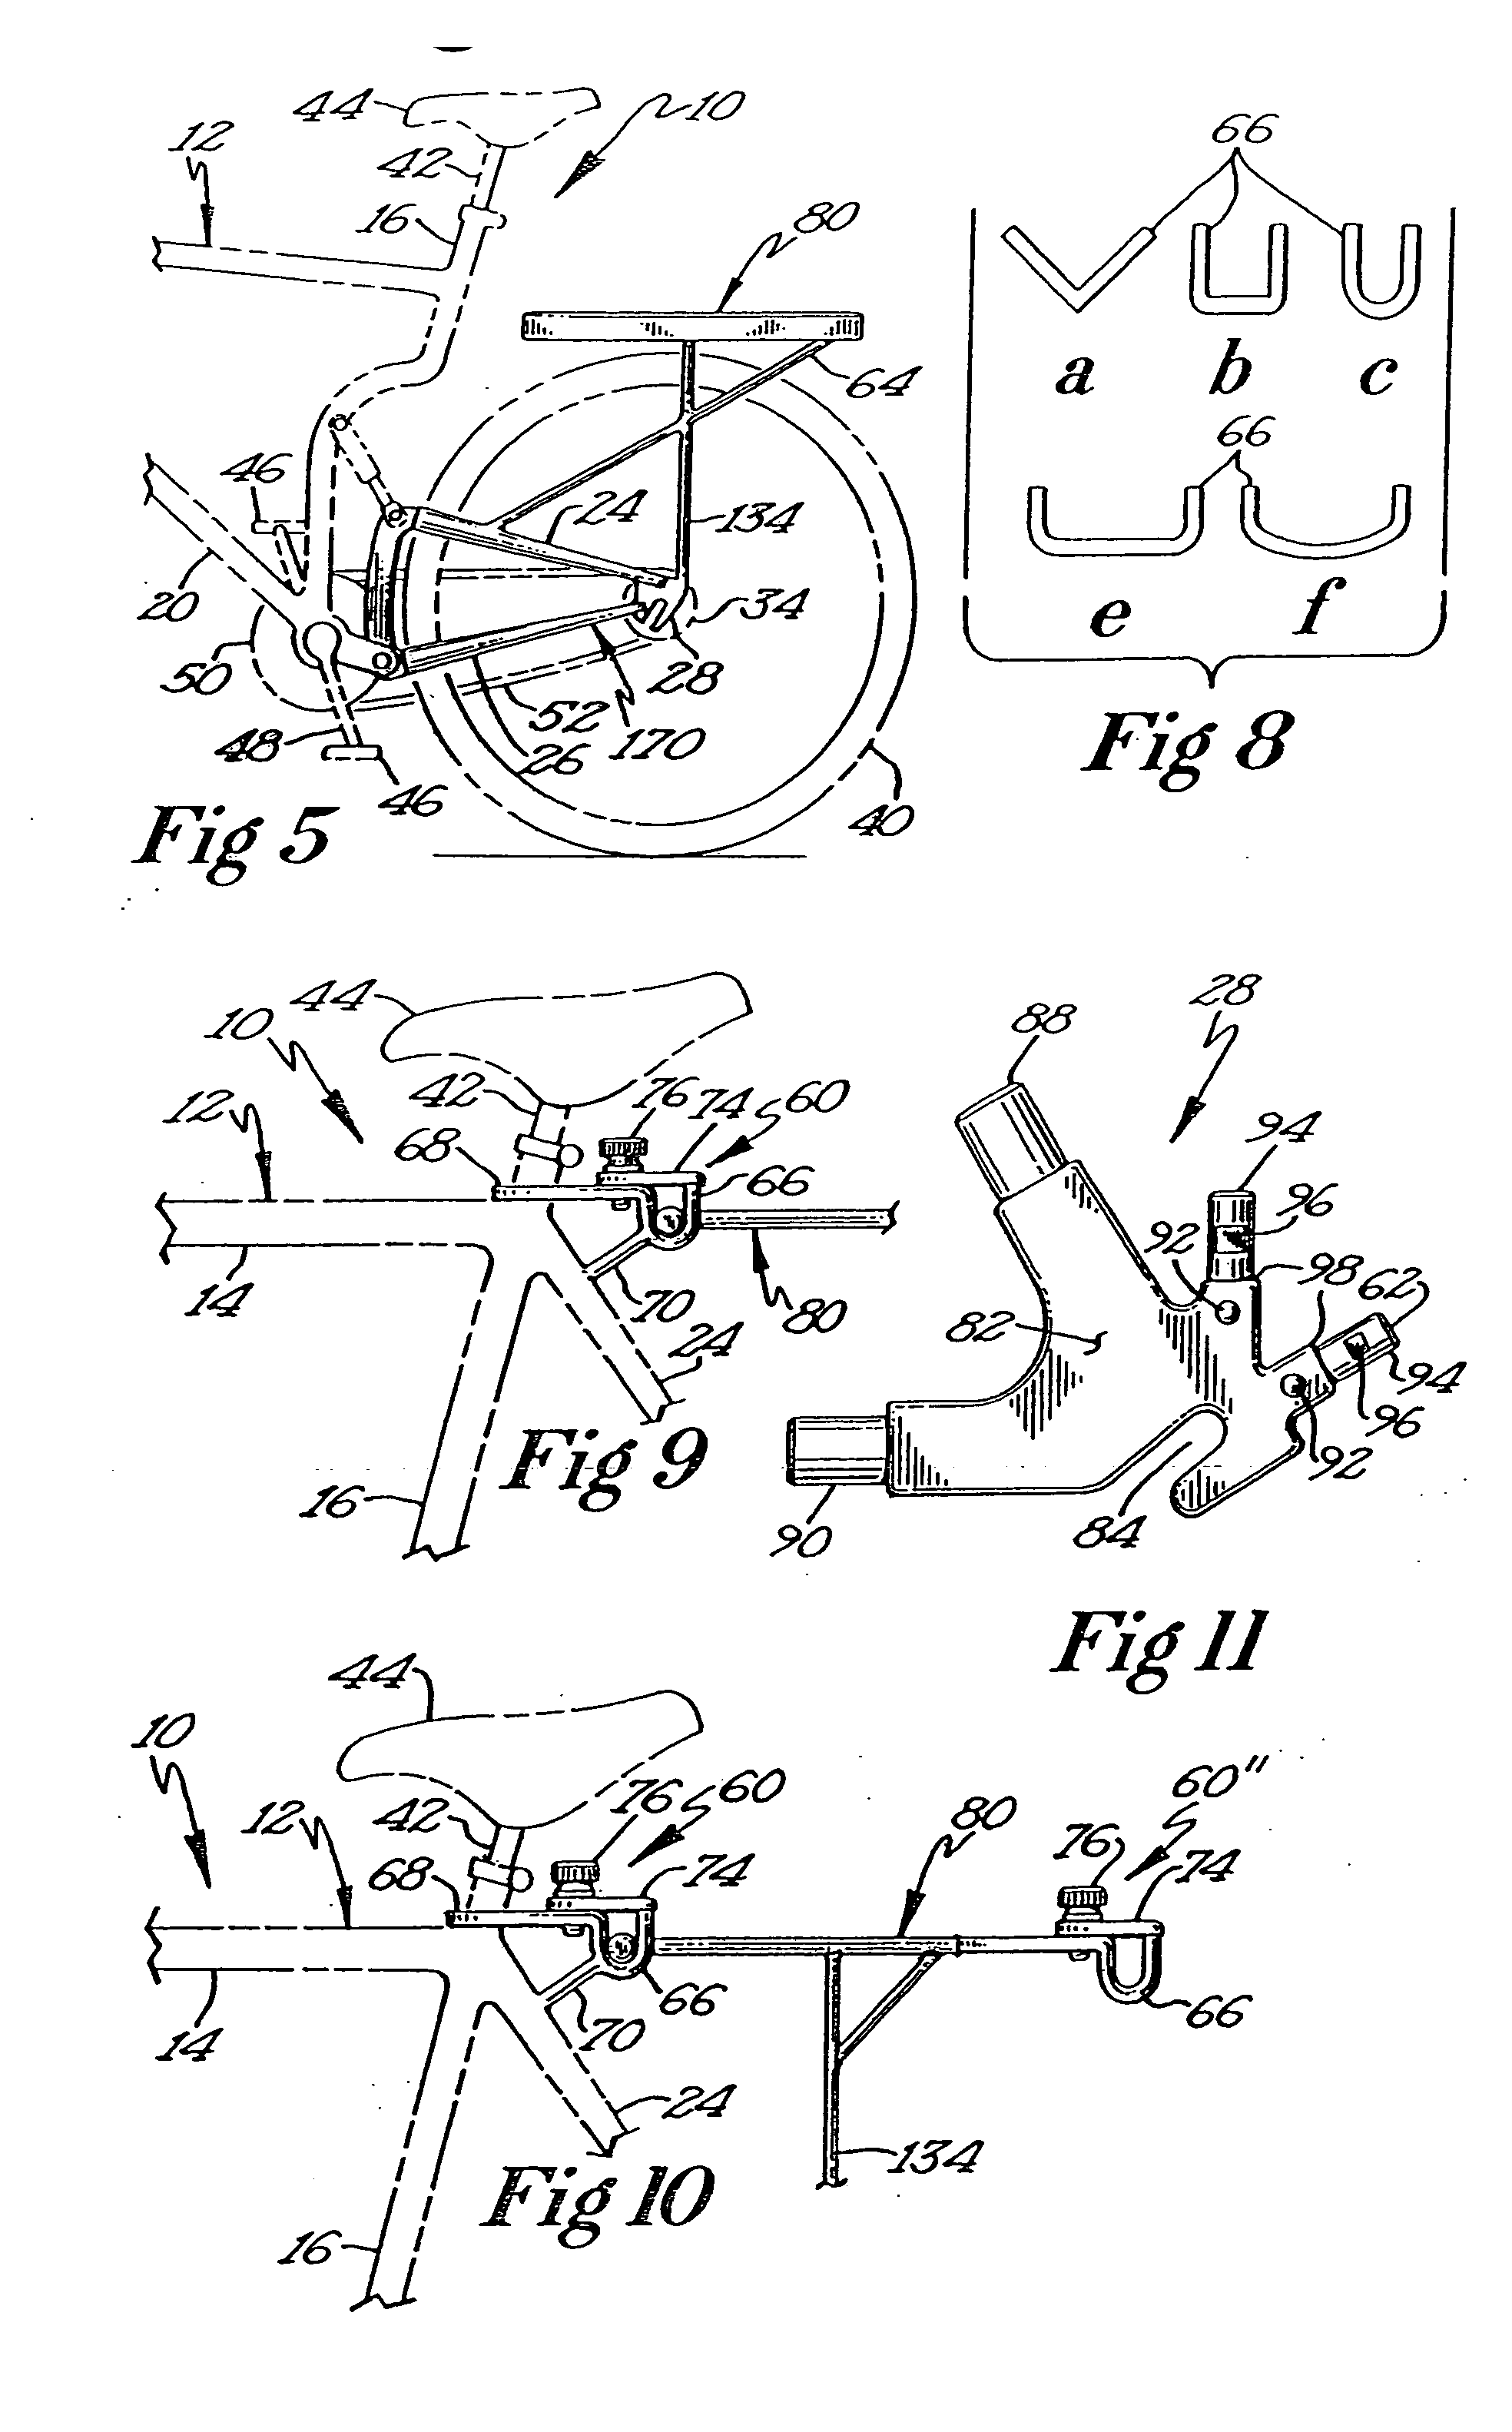 Attachment system for bicycle accessories